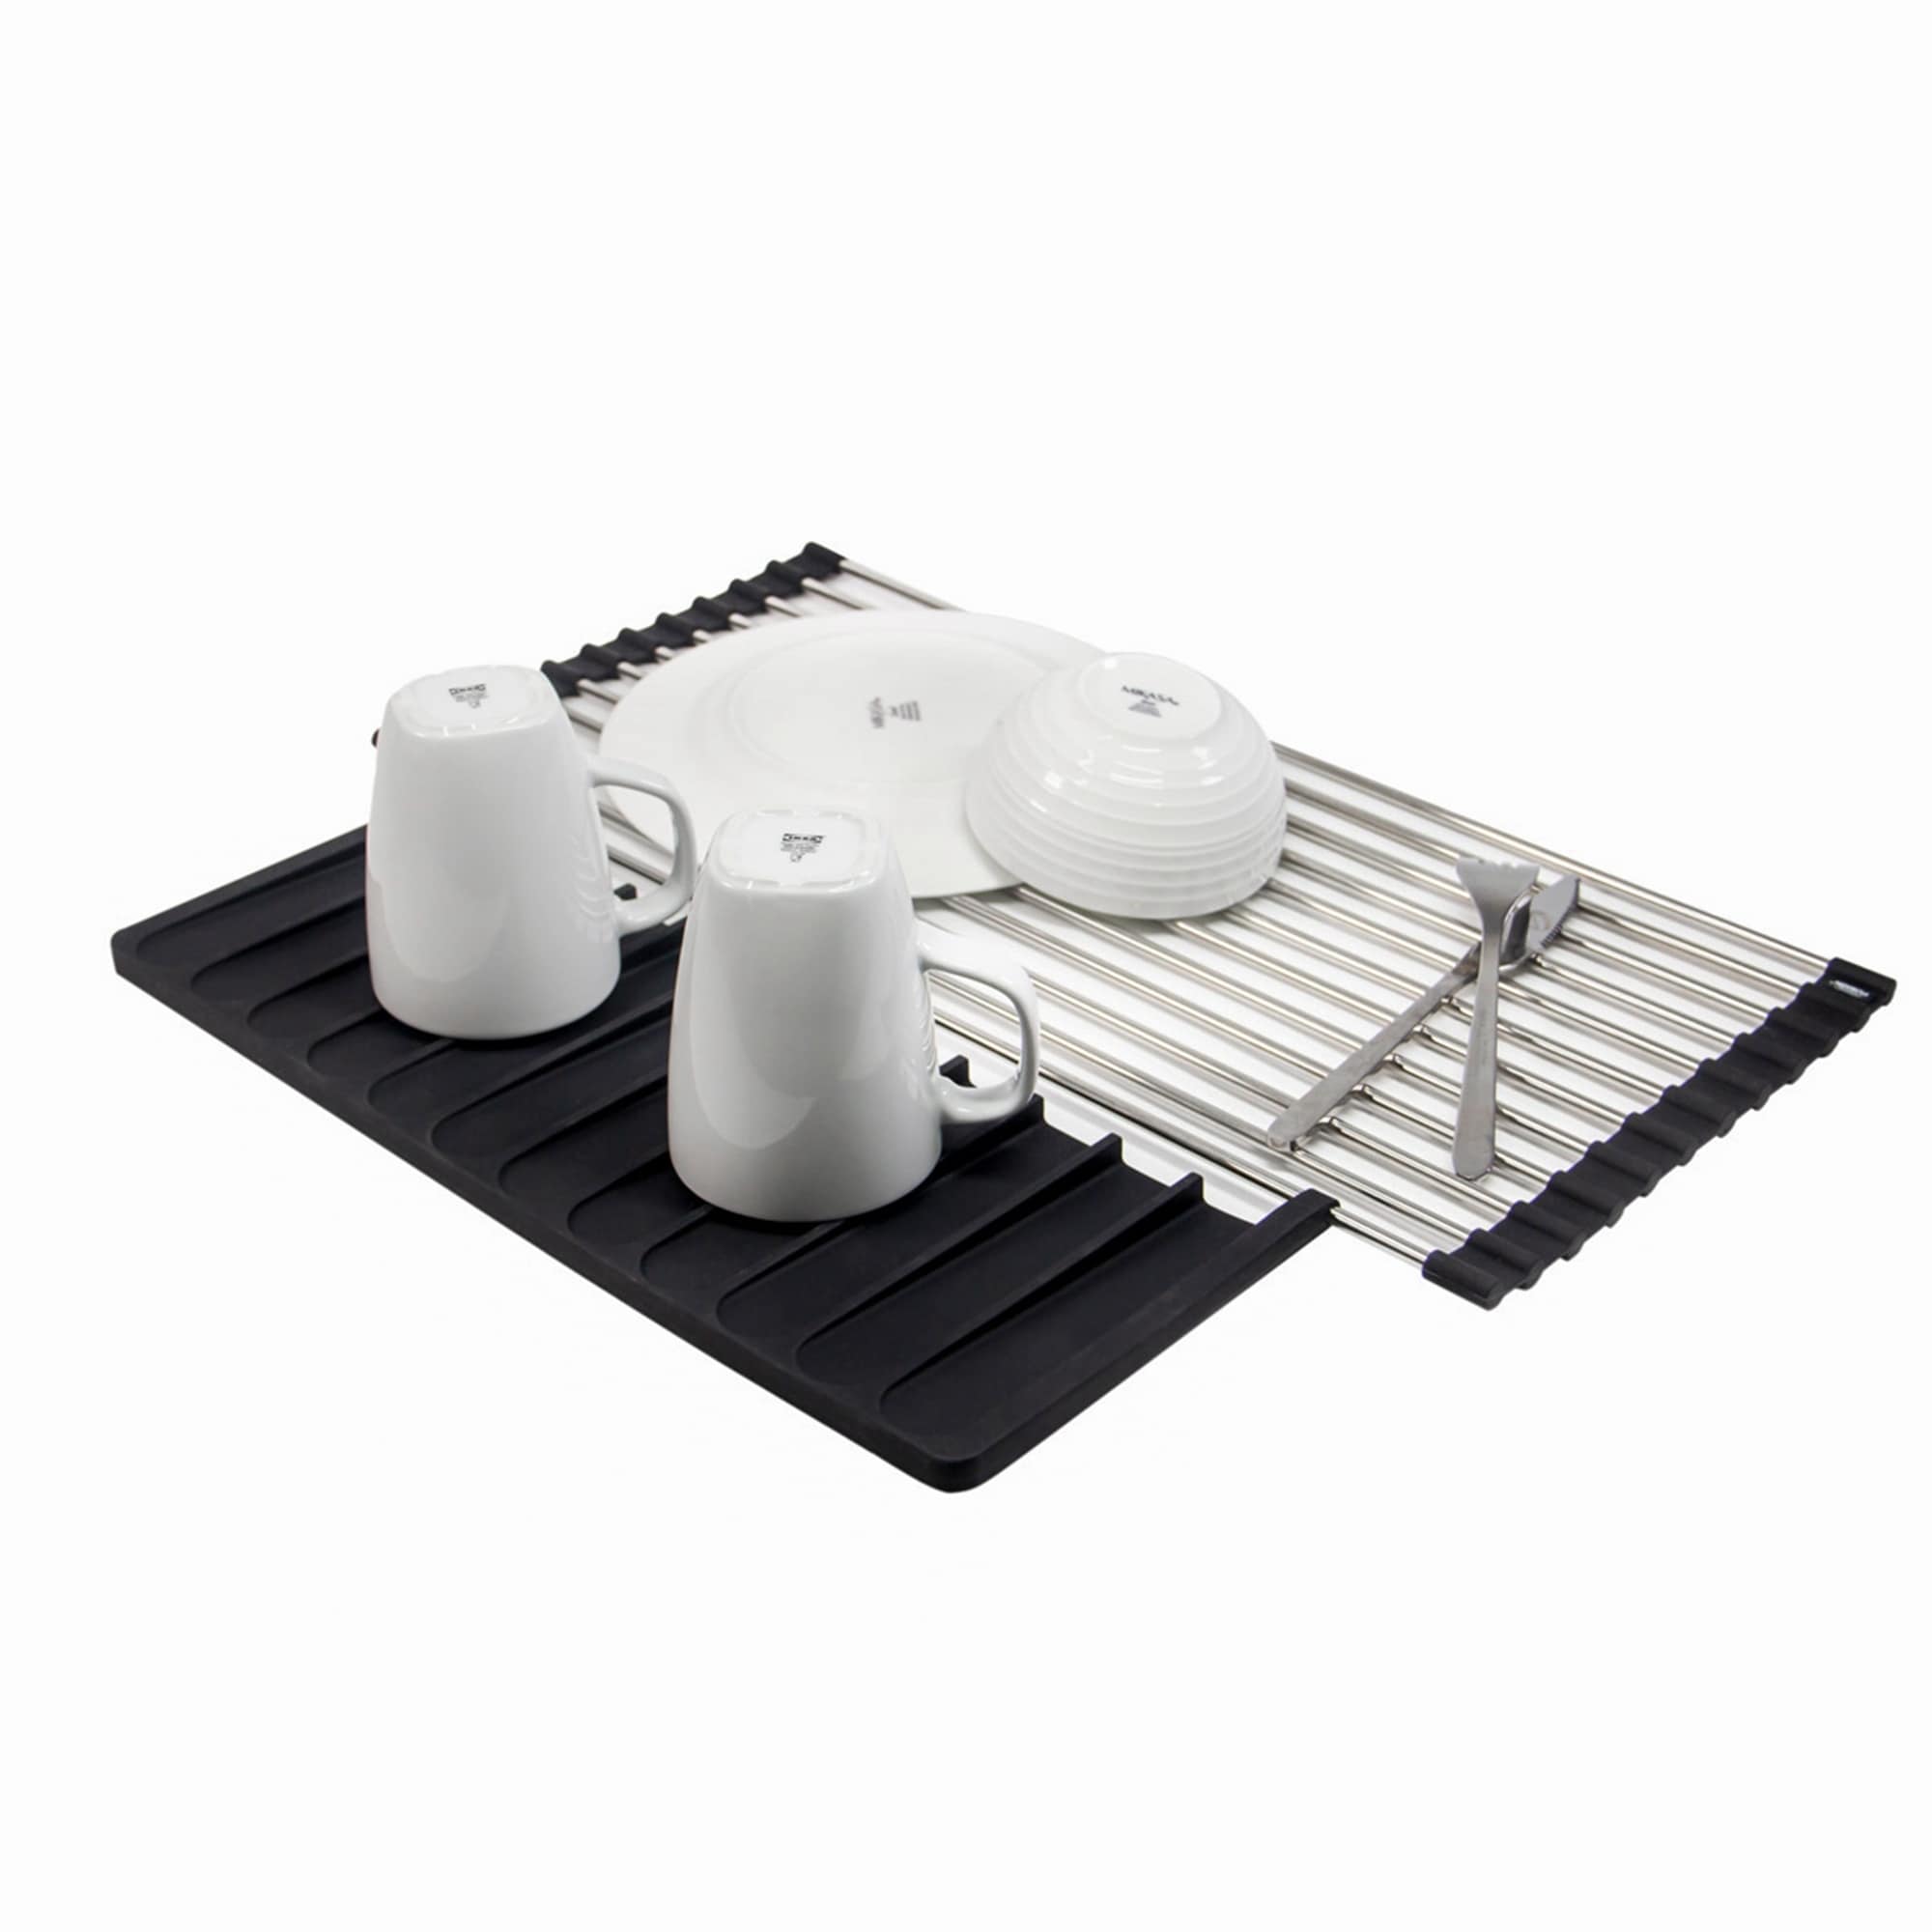 https://ak1.ostkcdn.com/images/products/is/images/direct/1ef4298890cd717fdaa8eca13f9df1c875e163f6/Grand-Fusion-Roll-Up-Over-the-Sink-Rack-with-Silicone-Drying-Mat%2C-Black.jpg